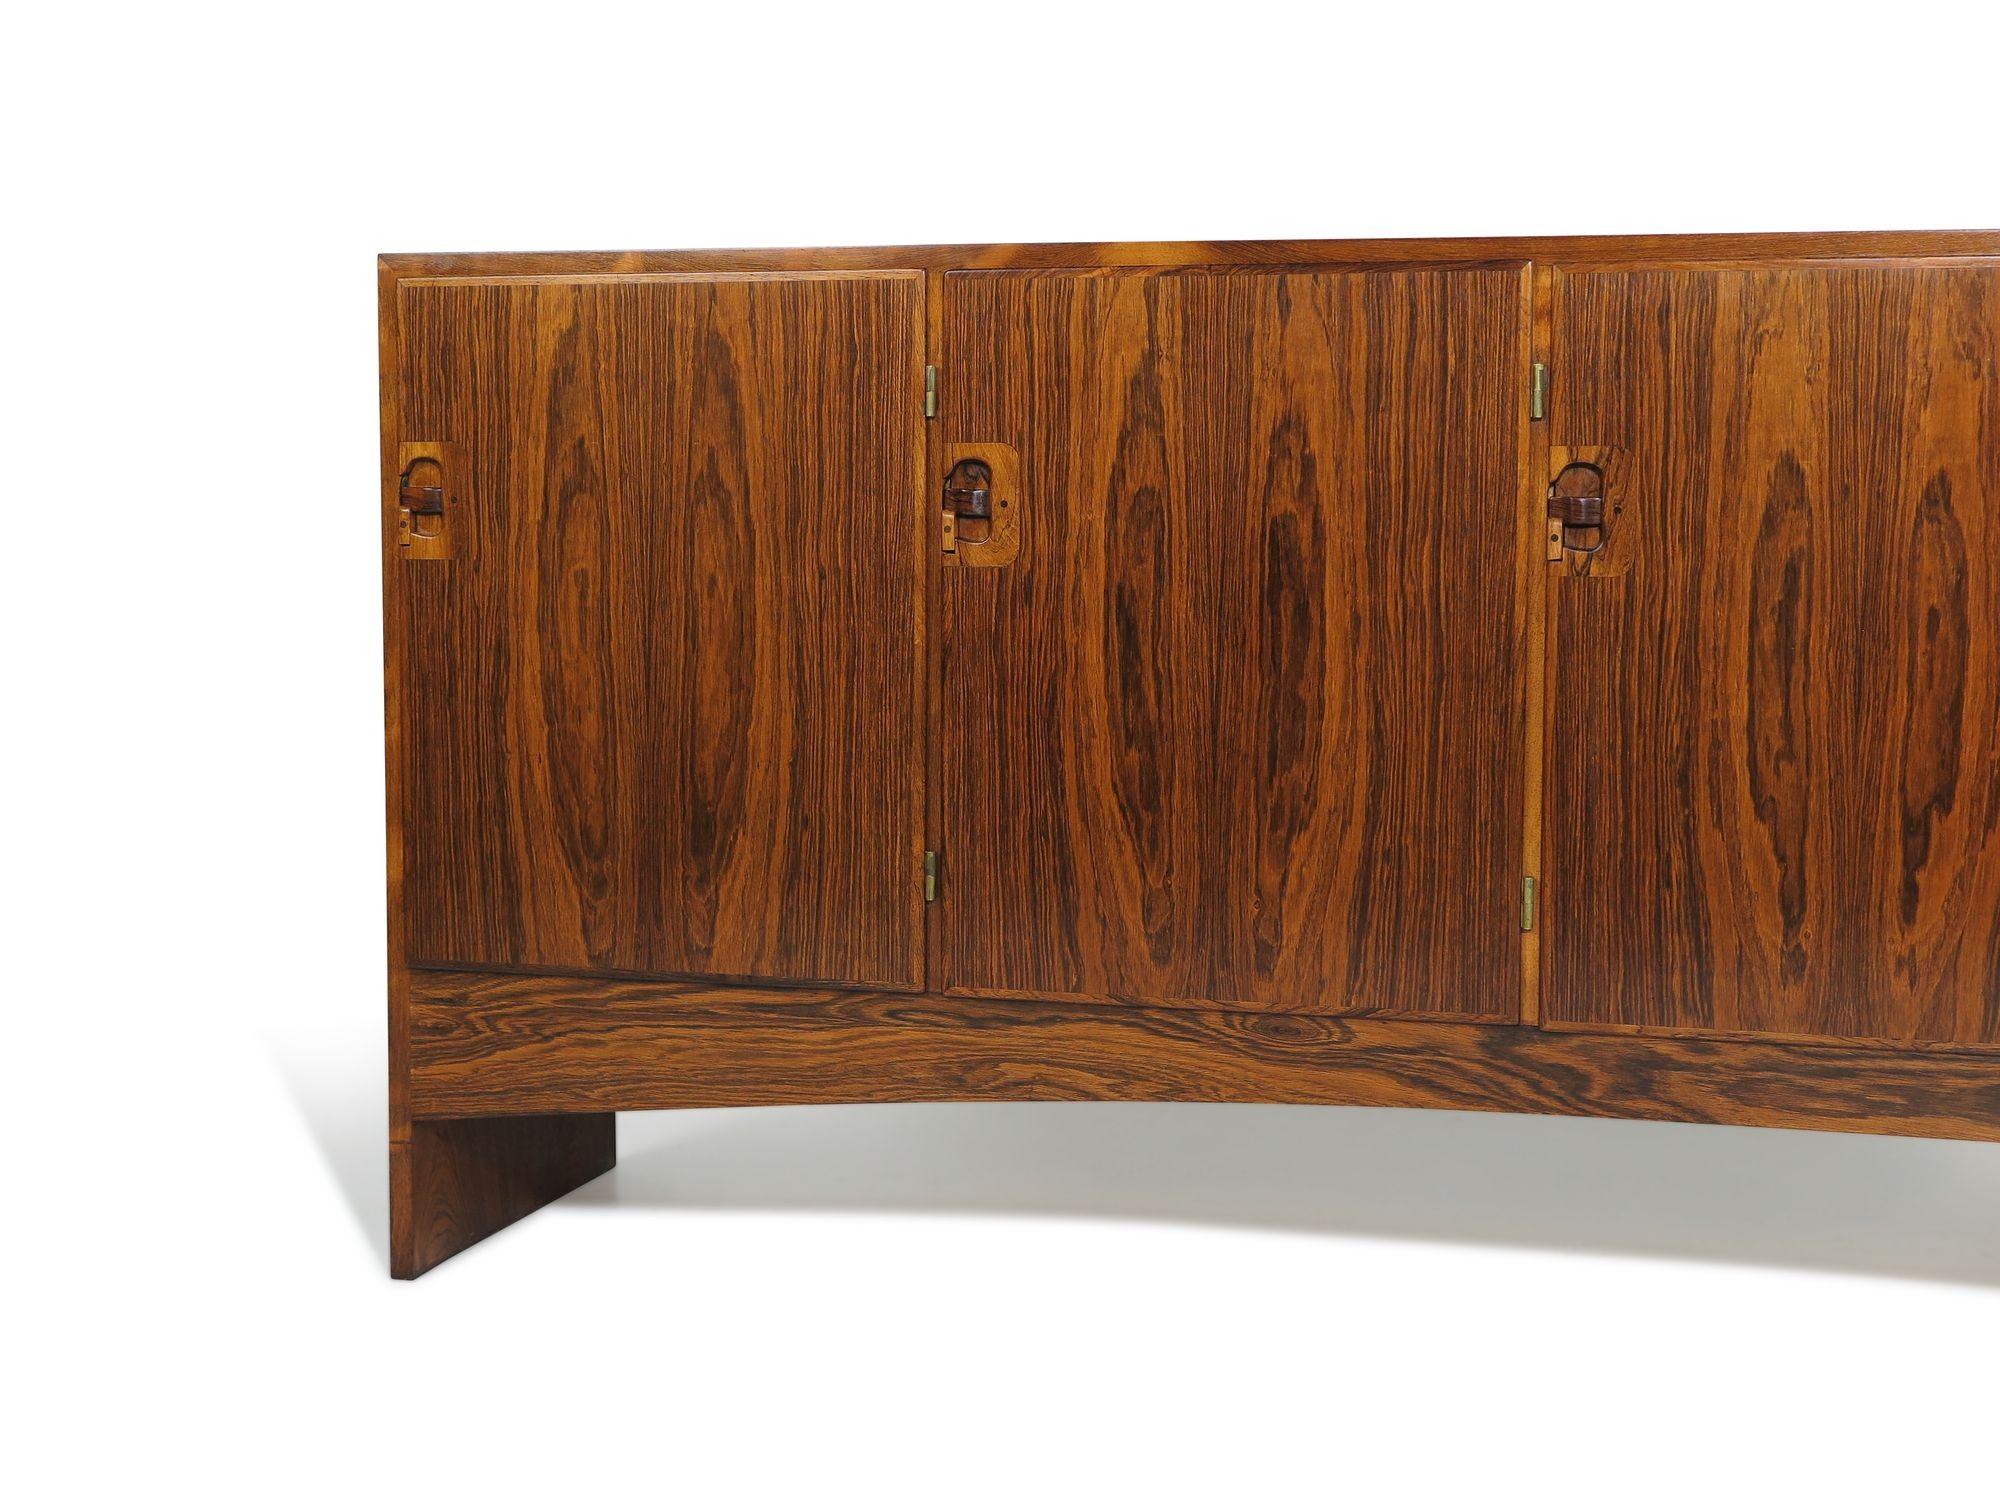 Large Mid-century Danish rosewood credenza designed by Harry Østergaard for Randers Møbelfabrik, 1960, Denmark. The cabinet is crafted of figured Brazilian rosewood with five book-matched doors featuring uniquely sculpted latch pulls with exposed